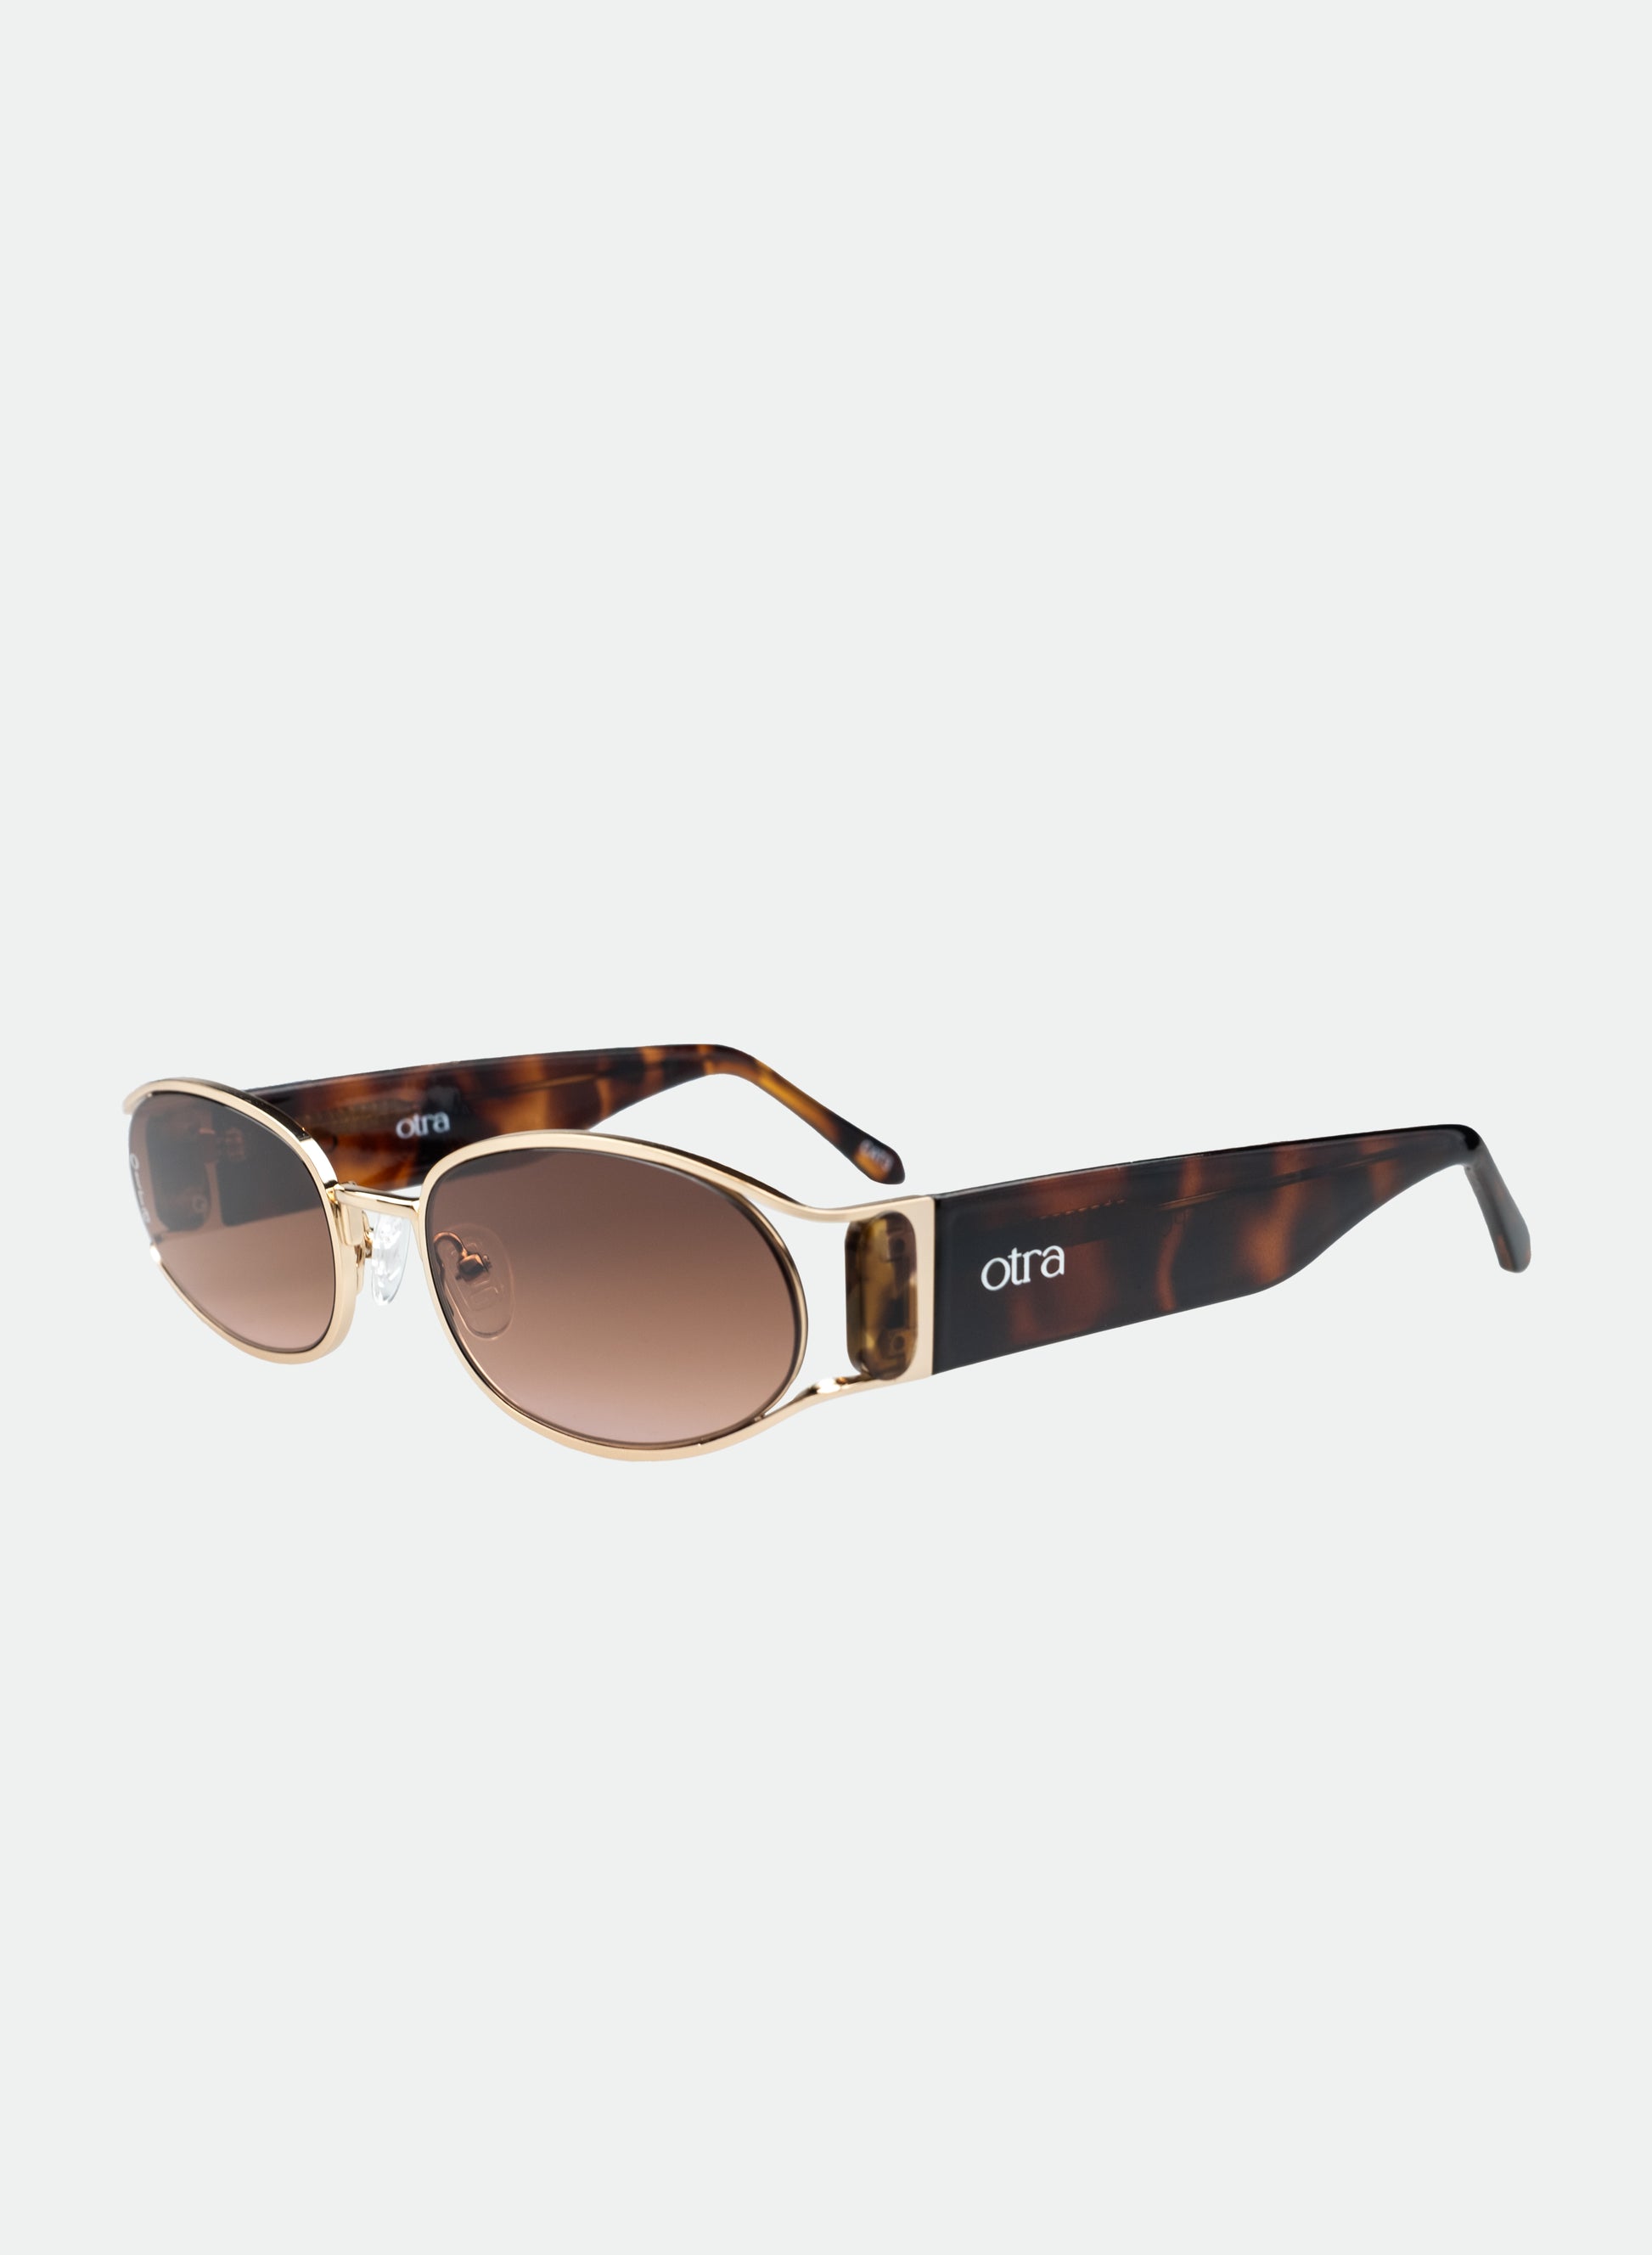 Polly sunglasses in gold tortoiseshell side view